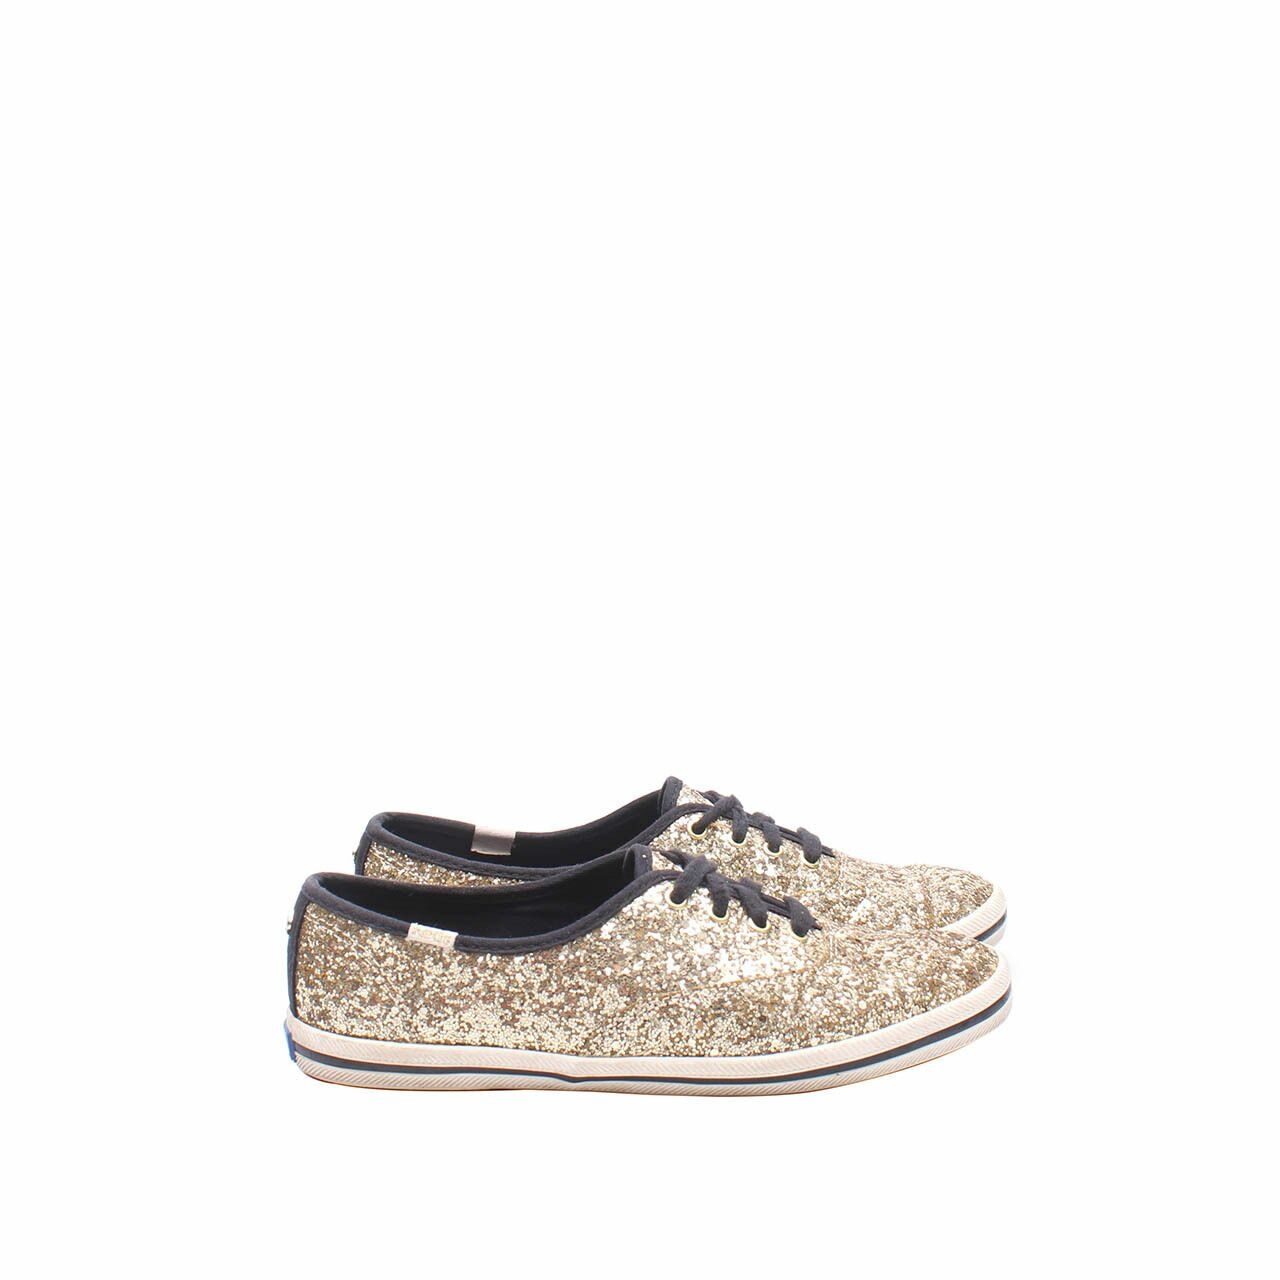 Keds X Kate Spade Champion Gold Glitter Sneakers